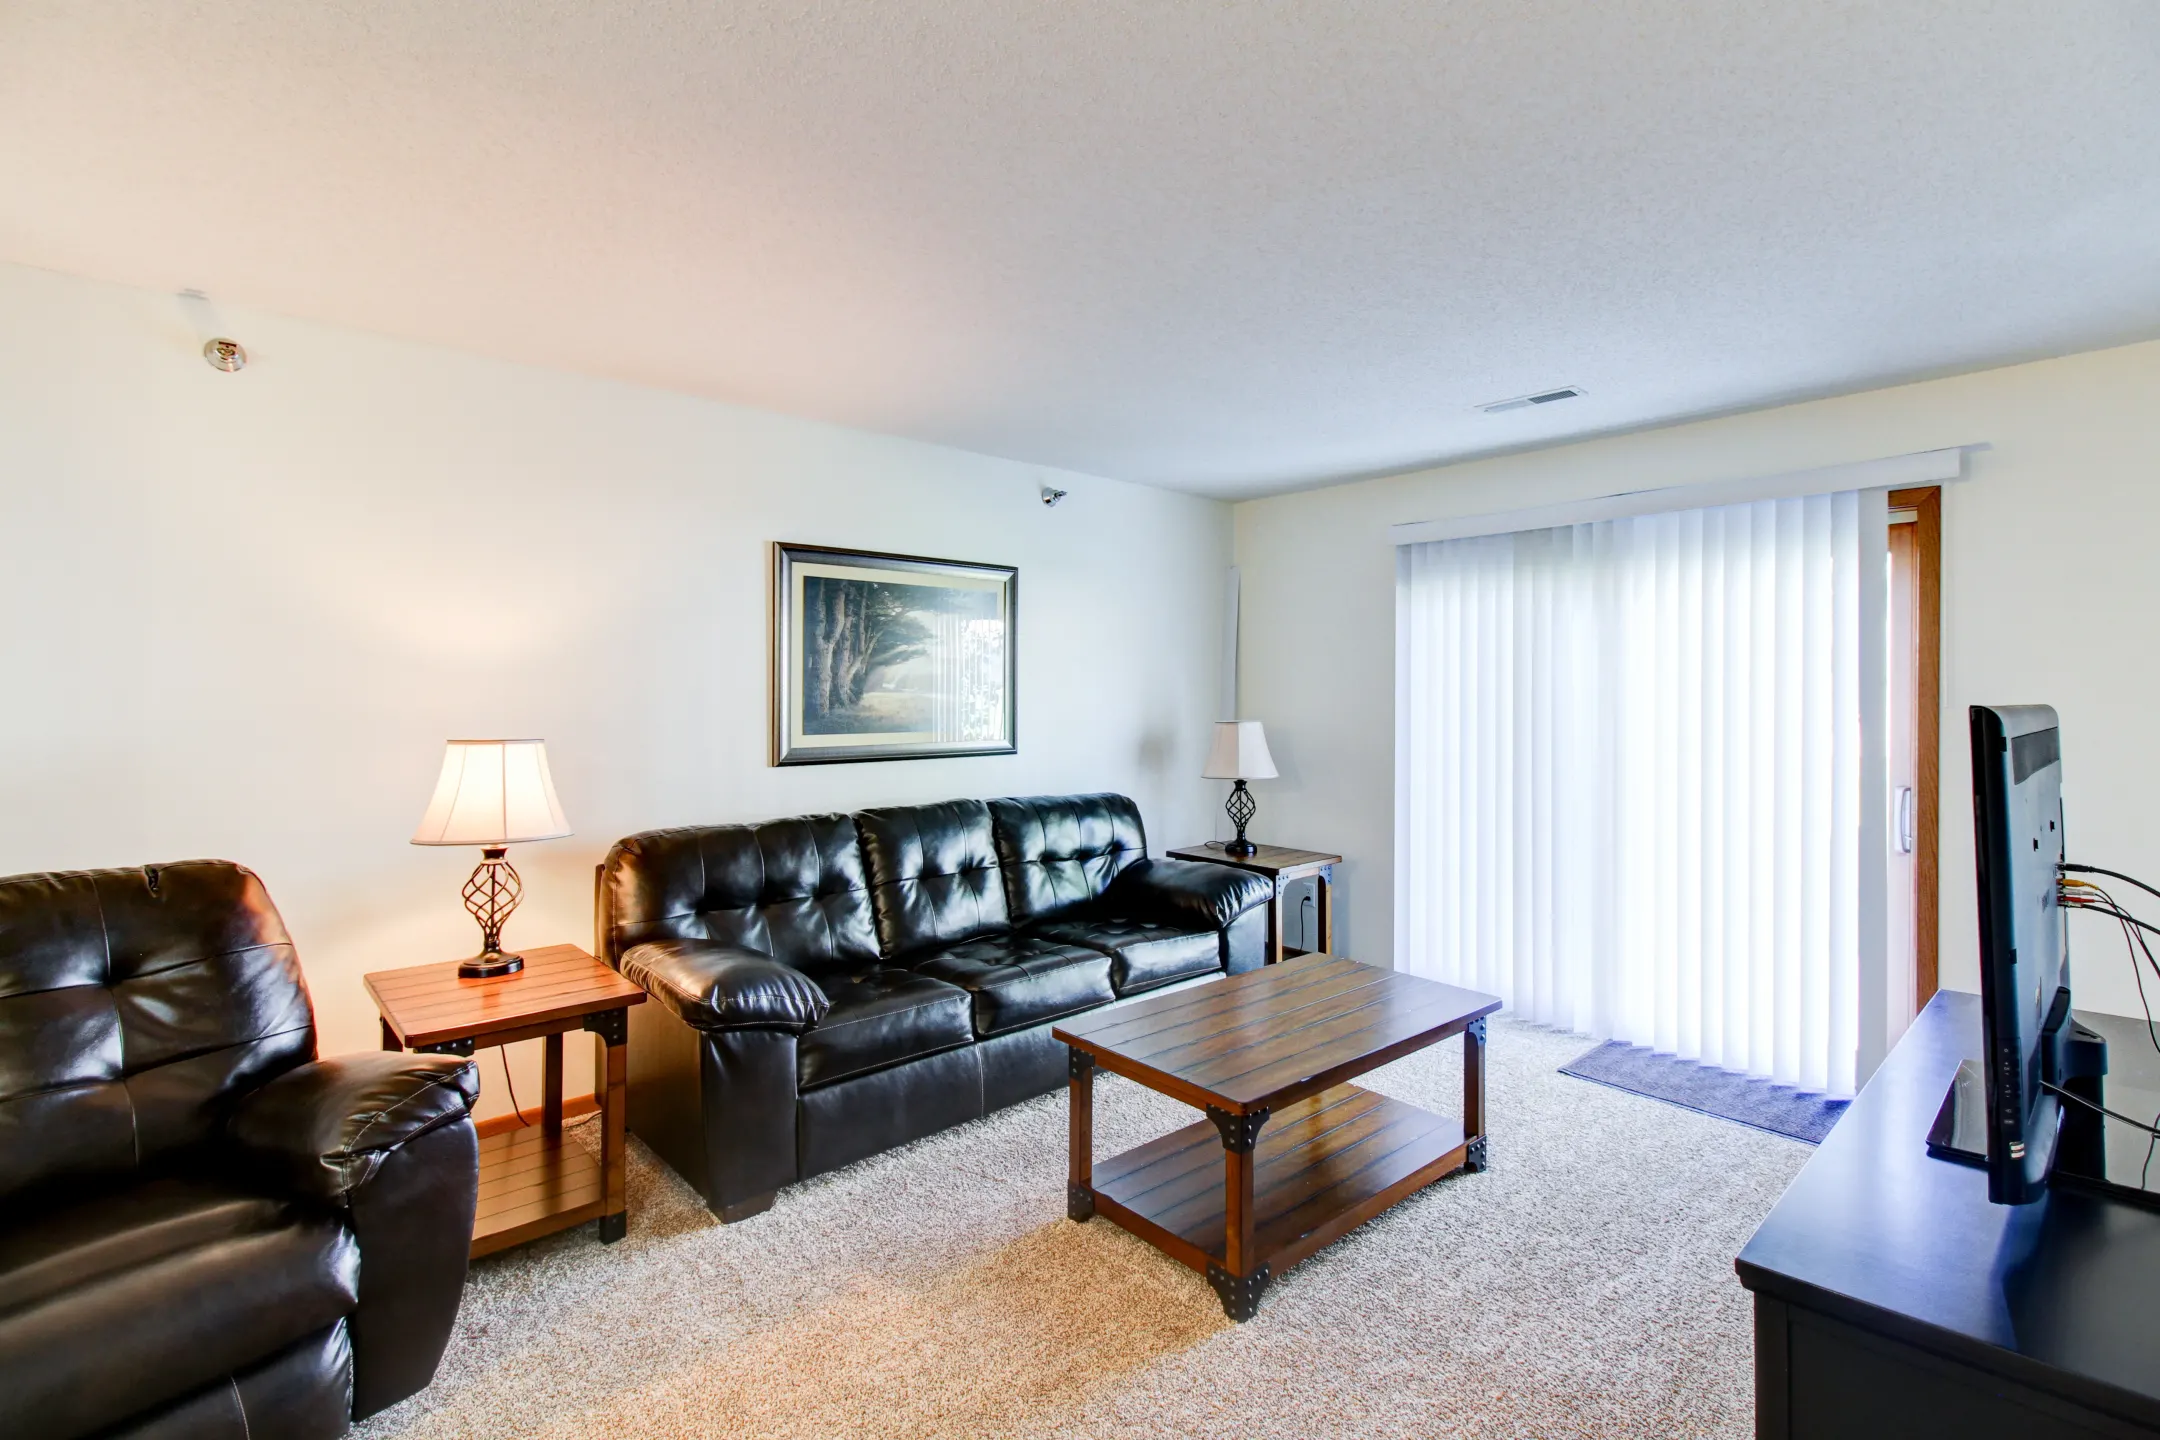 Living Room - Linden West Apartments - Indianola, IA